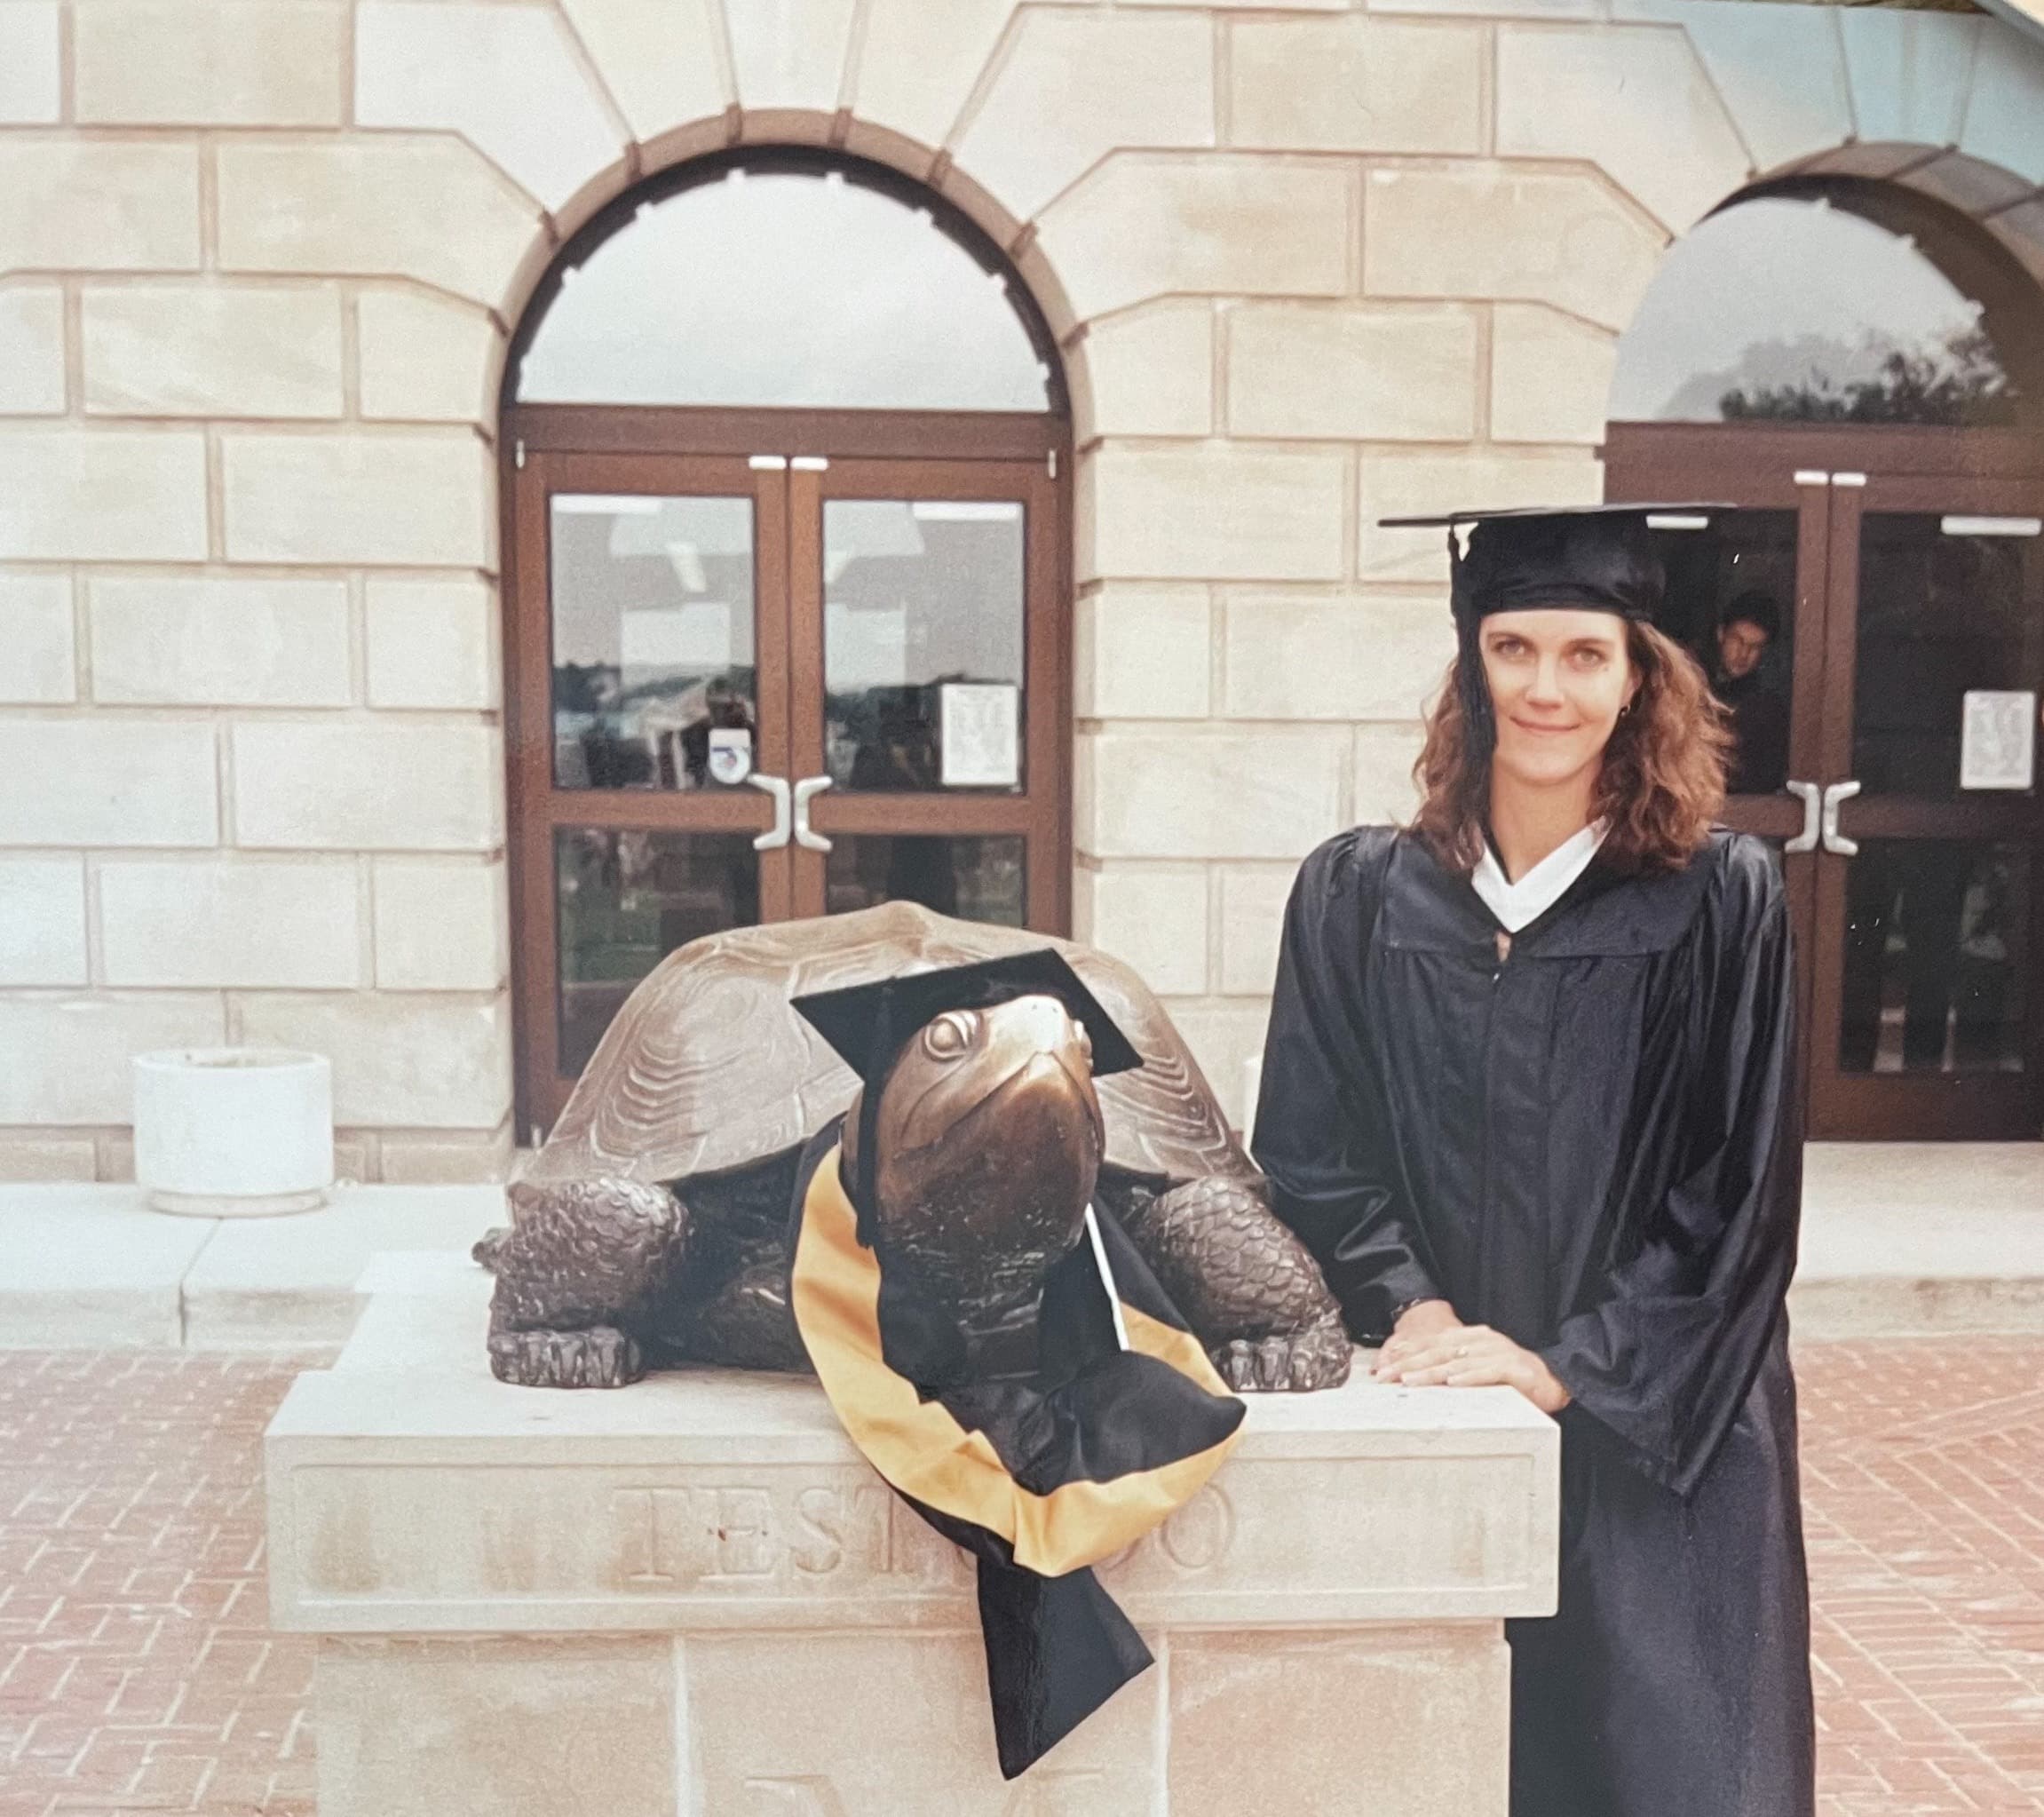 Alissa Arford '94, MBA '10 posed with Testudo at her first UMD graduation in May 1994.